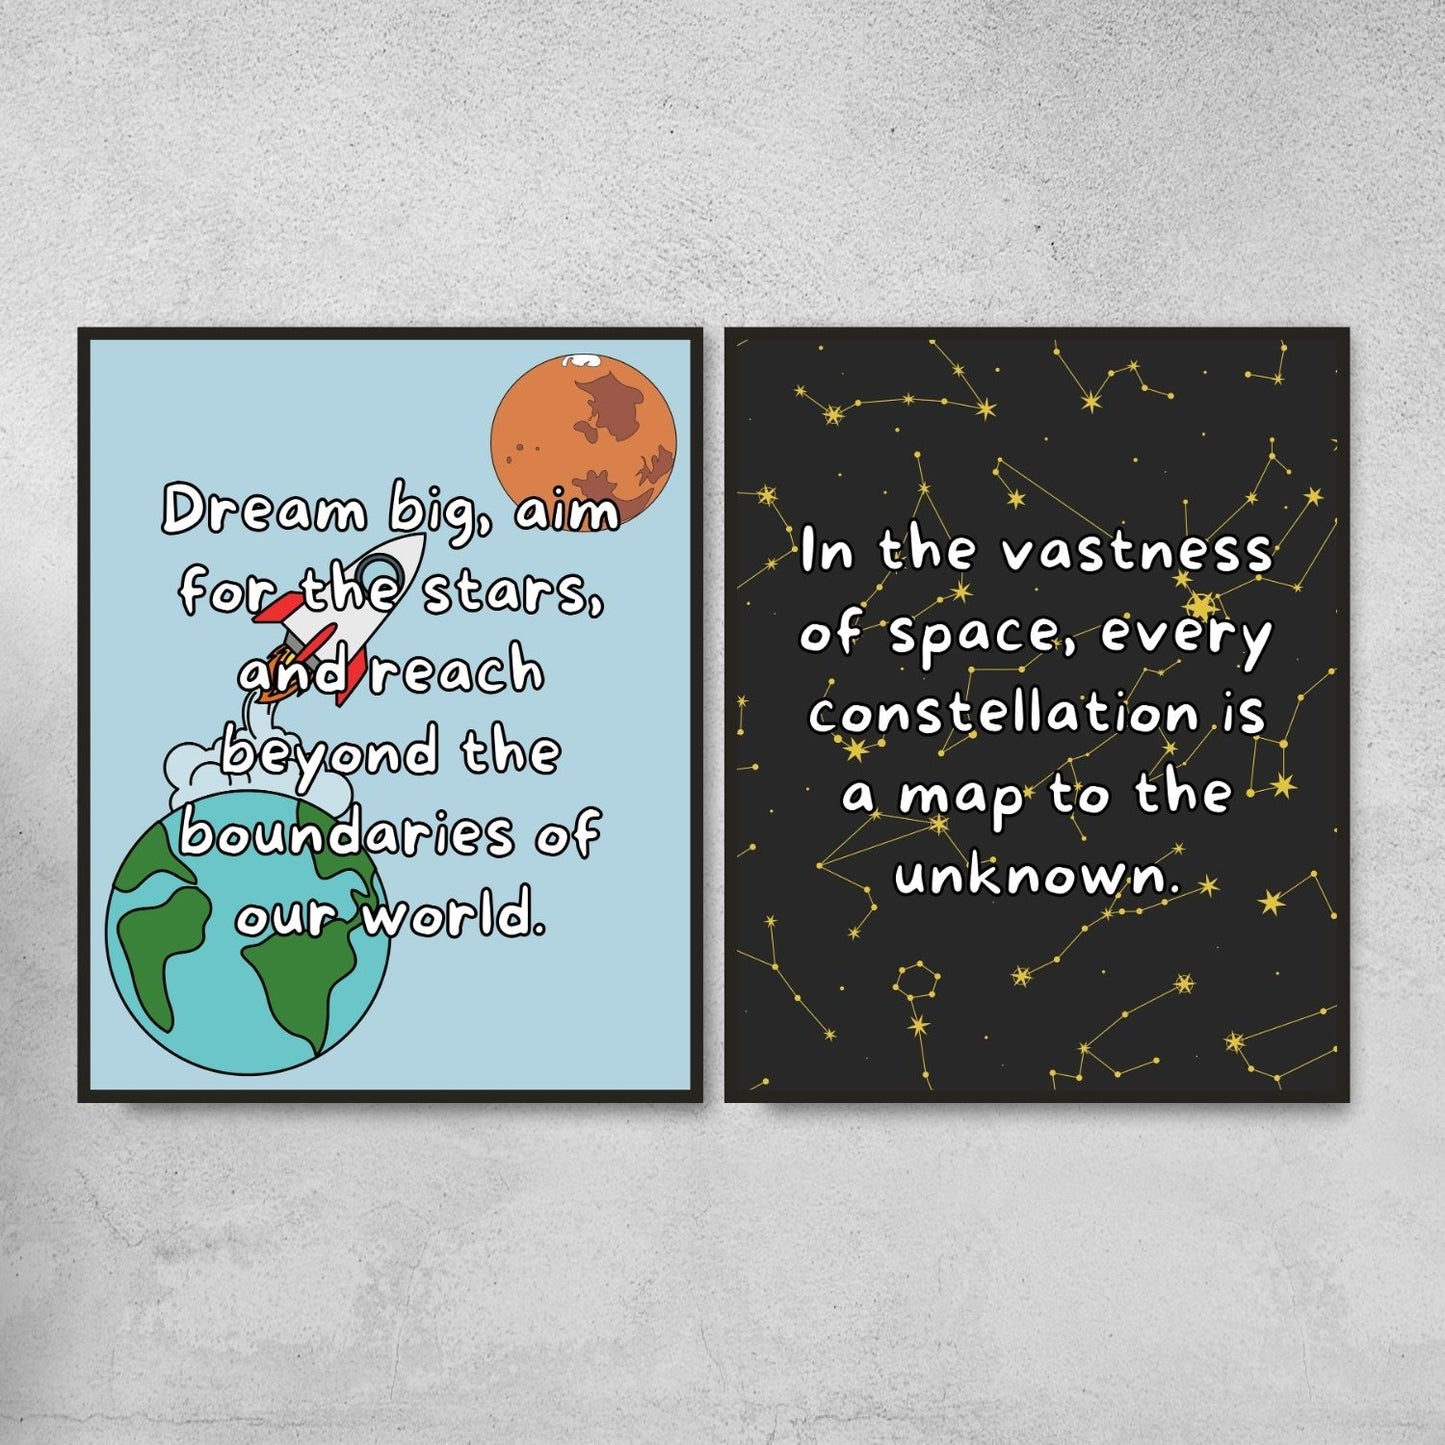 Outer space quotes for science classroom decor - Vol.1